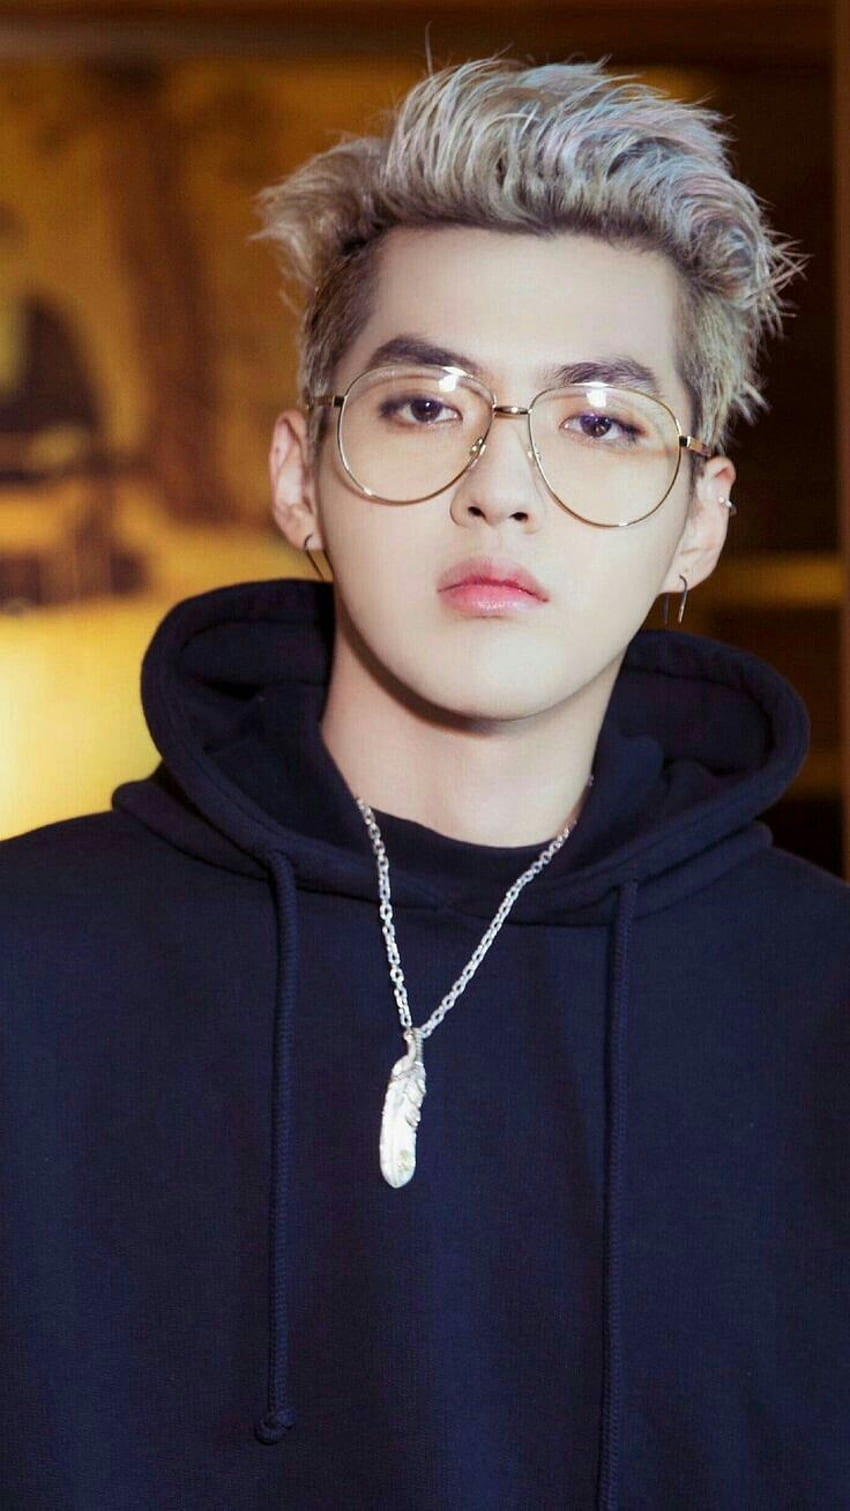 Kris is so fine I cannot breathe right now. I miss him being apart, EXO Kris HD phone wallpaper